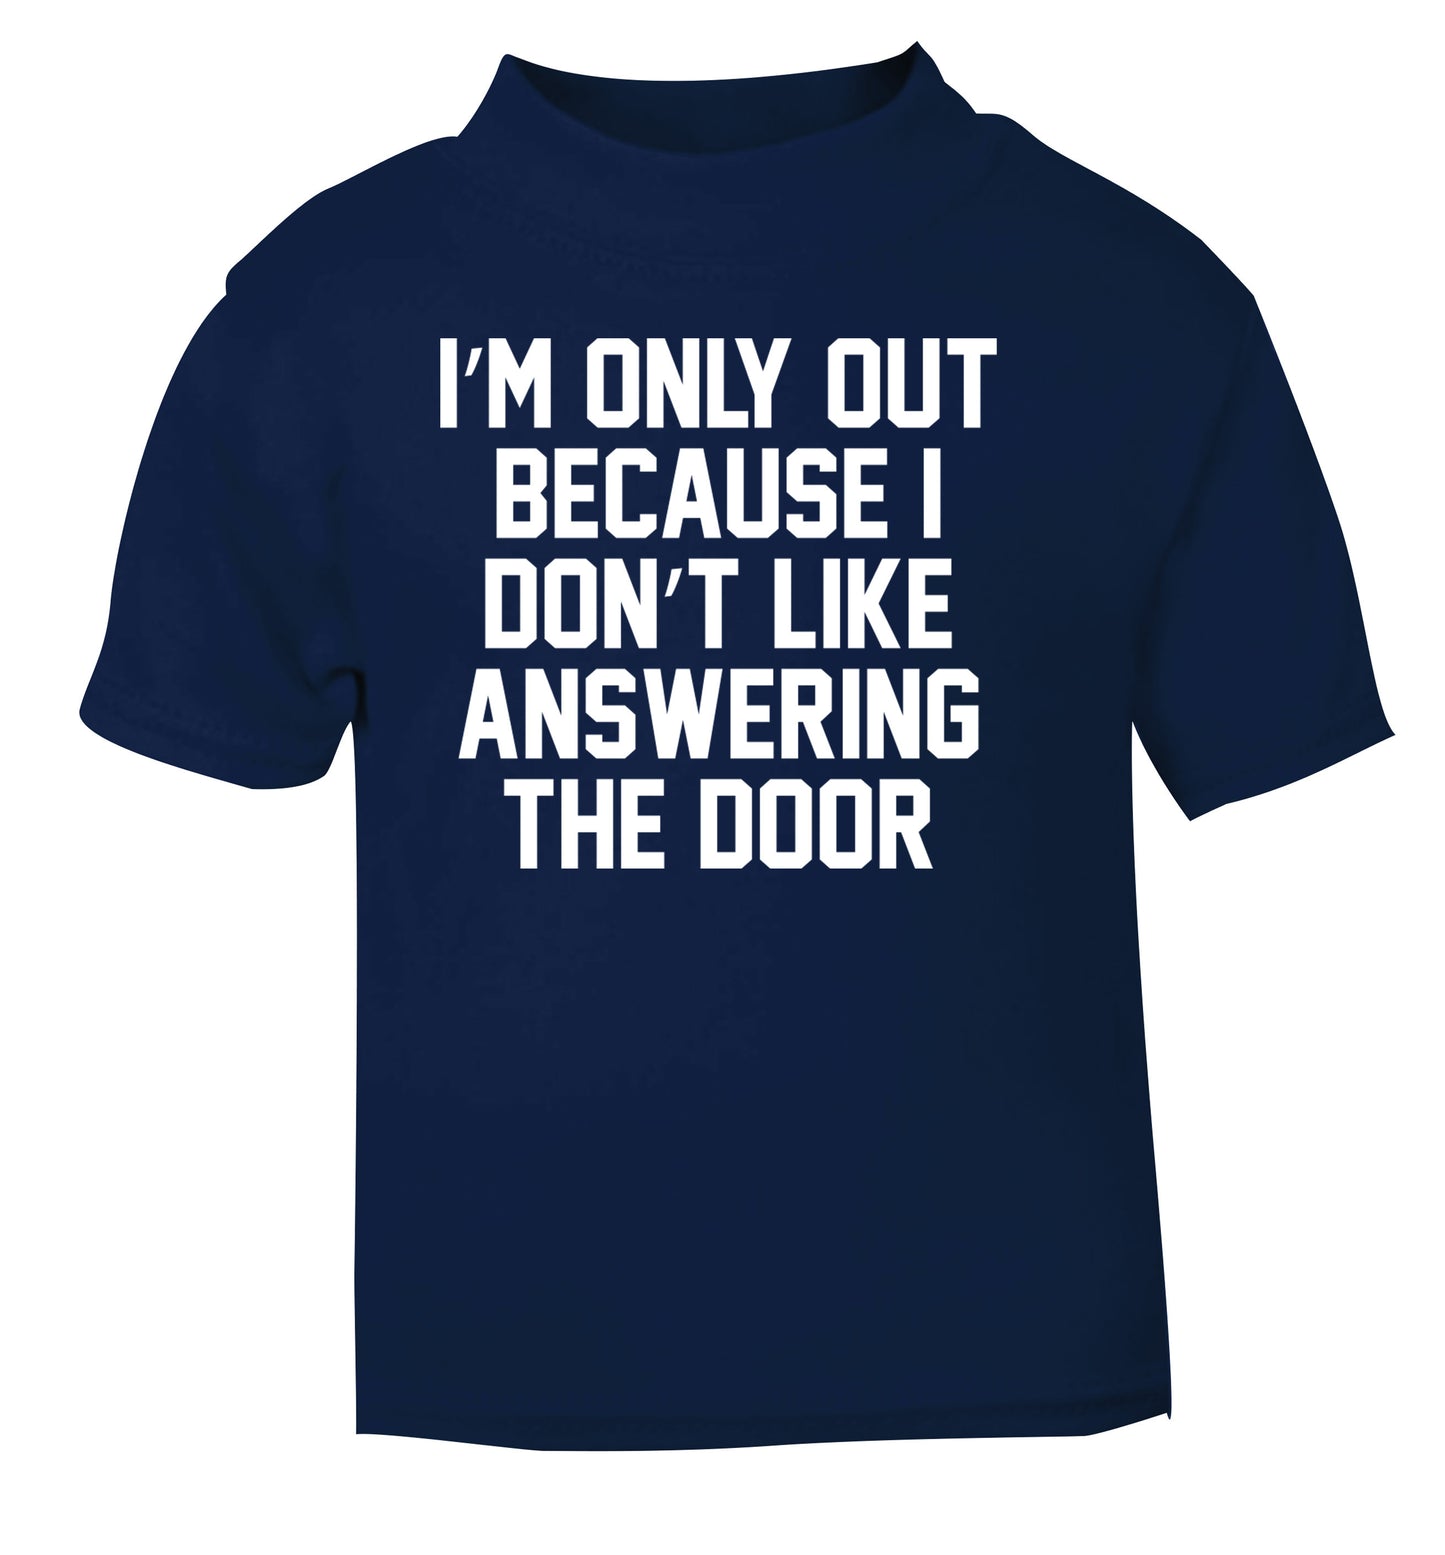 I'm only out because I don't like answering the door navy Baby Toddler Tshirt 2 Years